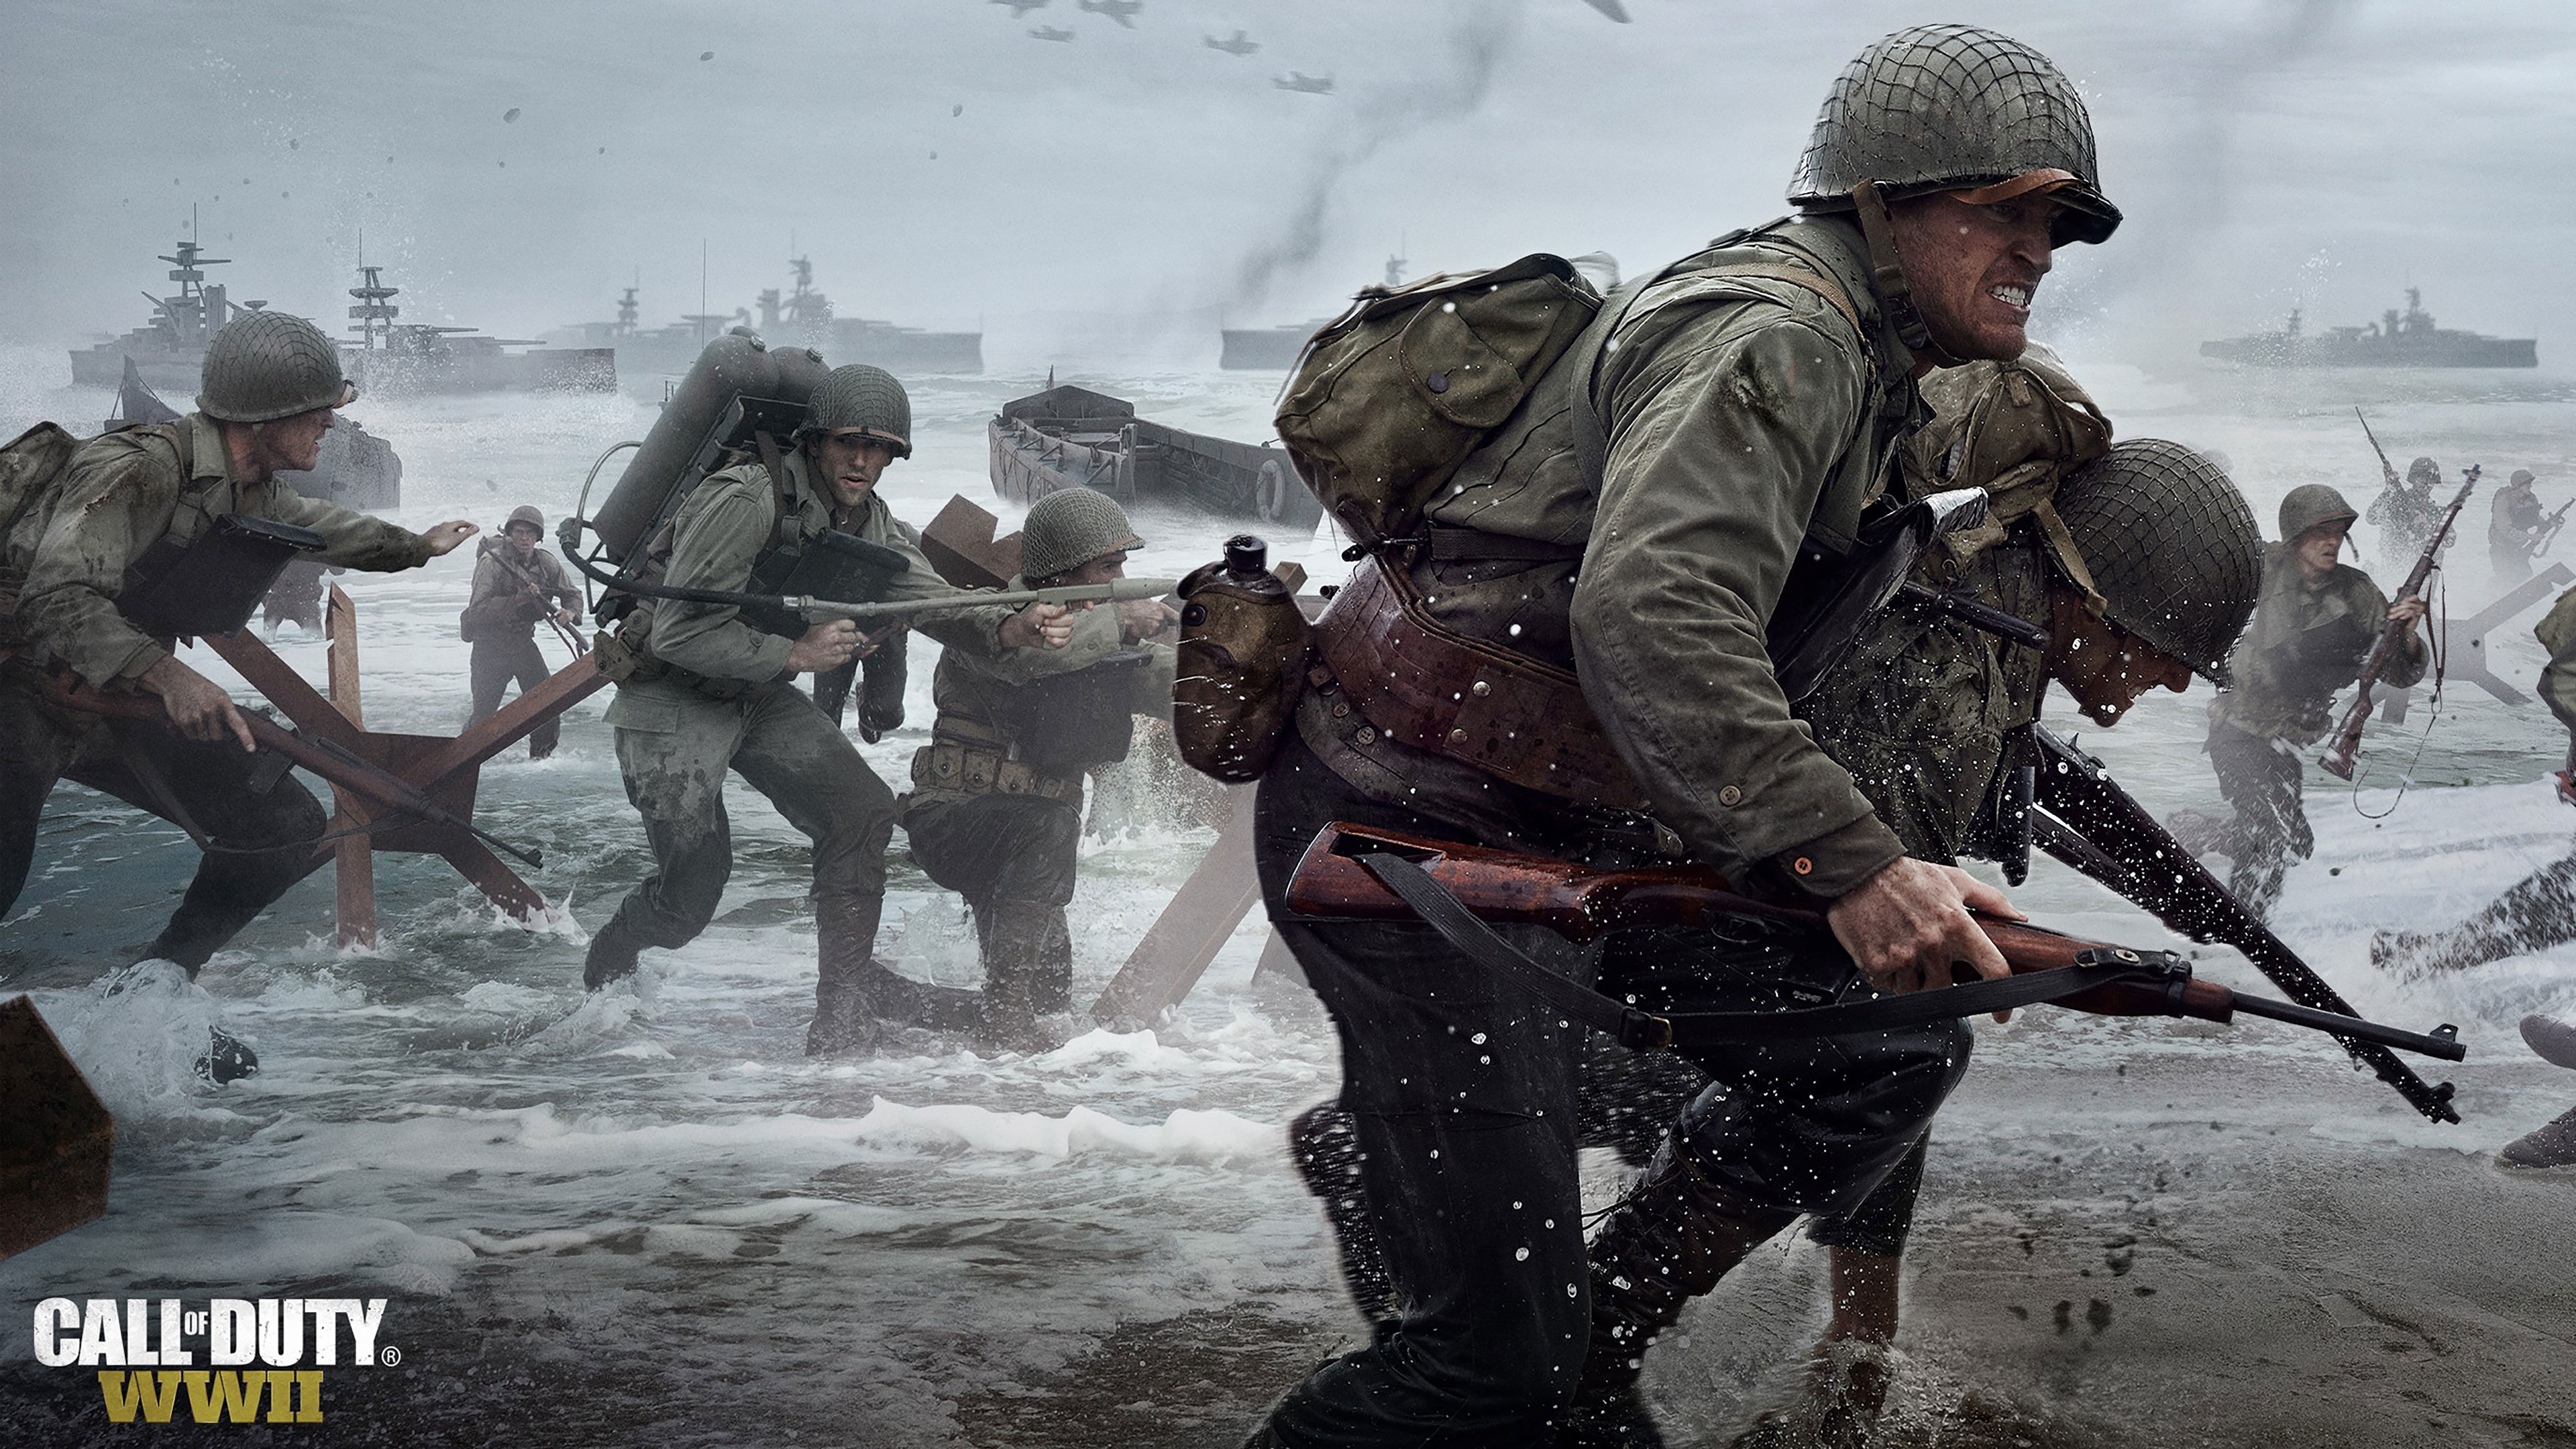 Call Of Duty Wwii Wallpapers In Ultra Hd 4k - Call Of Duty Ww2 Wallpaper 4k - HD Wallpaper 